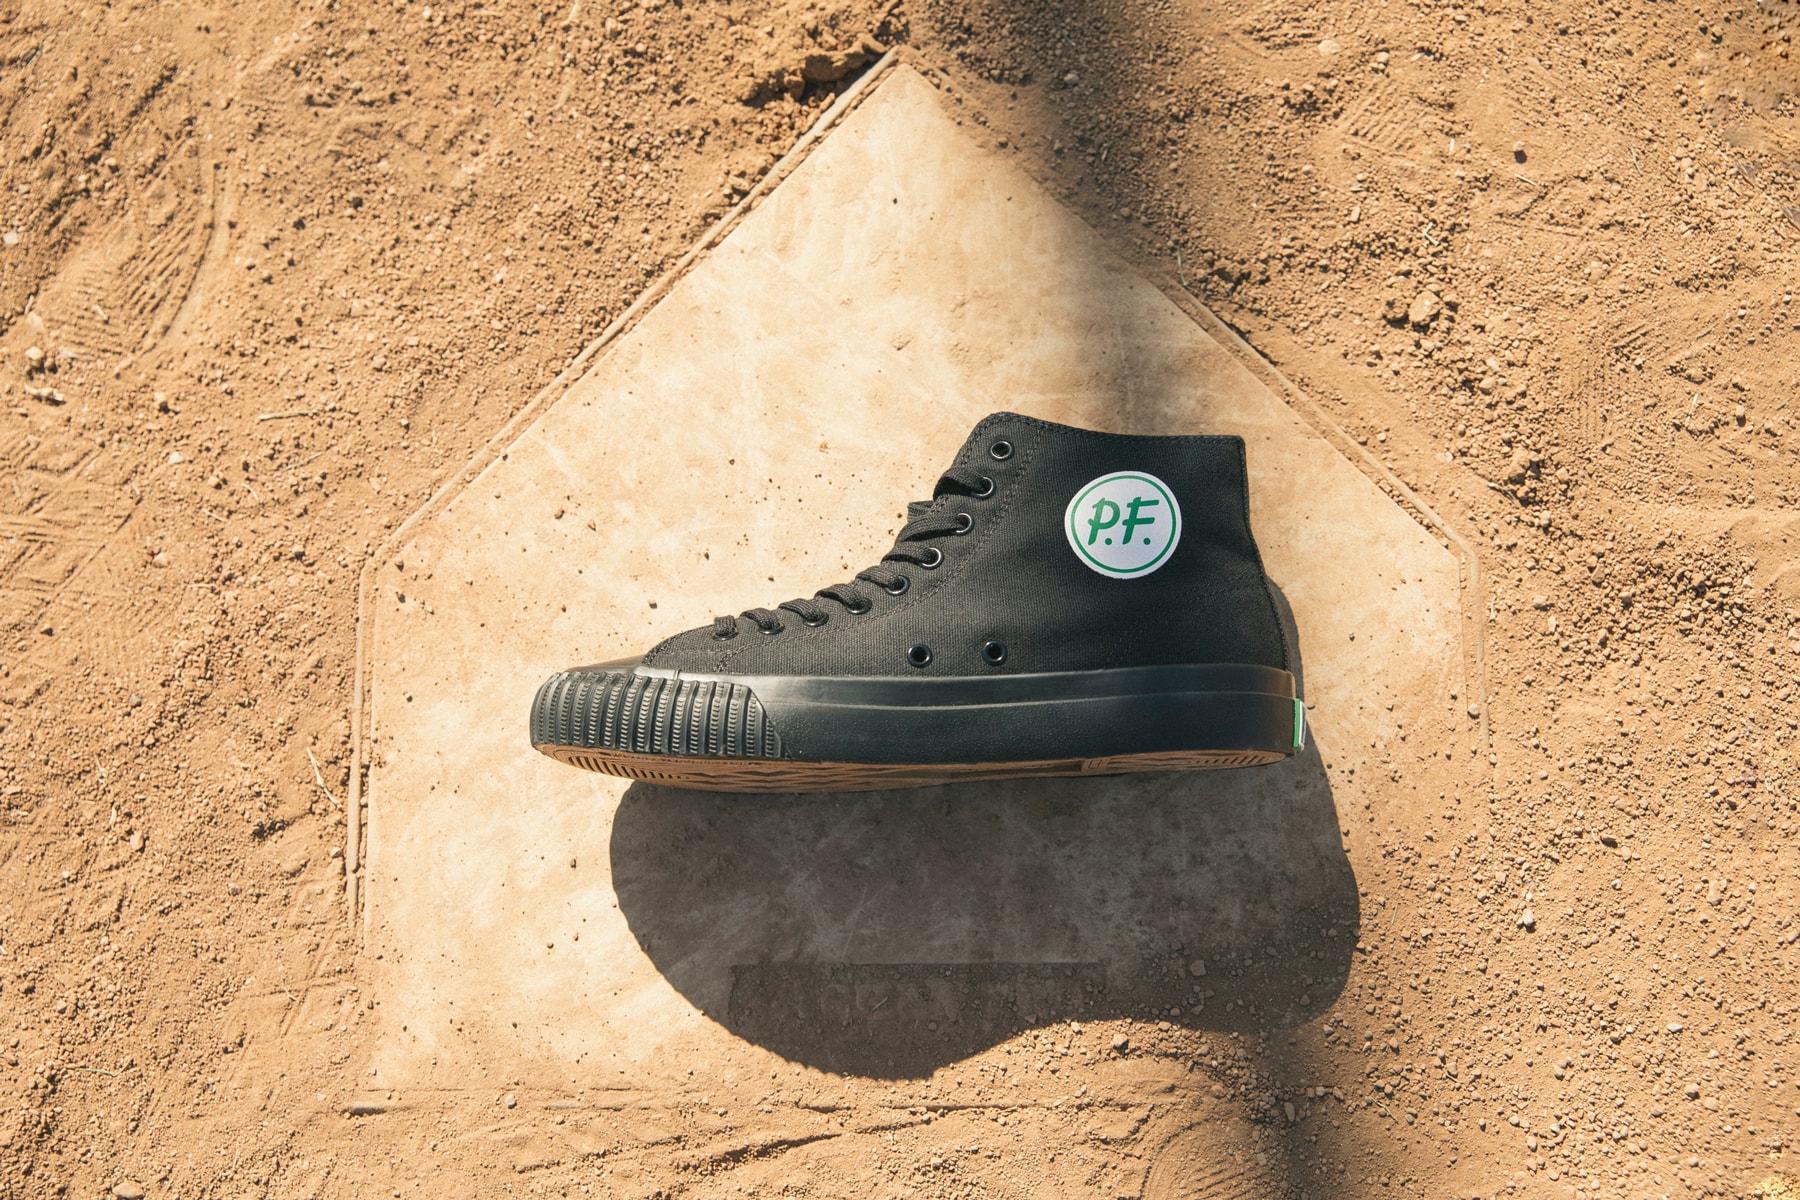 PF Flyers The Sandlot collaboration capsule 25 anniversary release drop launch april 7 2018 benny the jet cleat t tee shirt